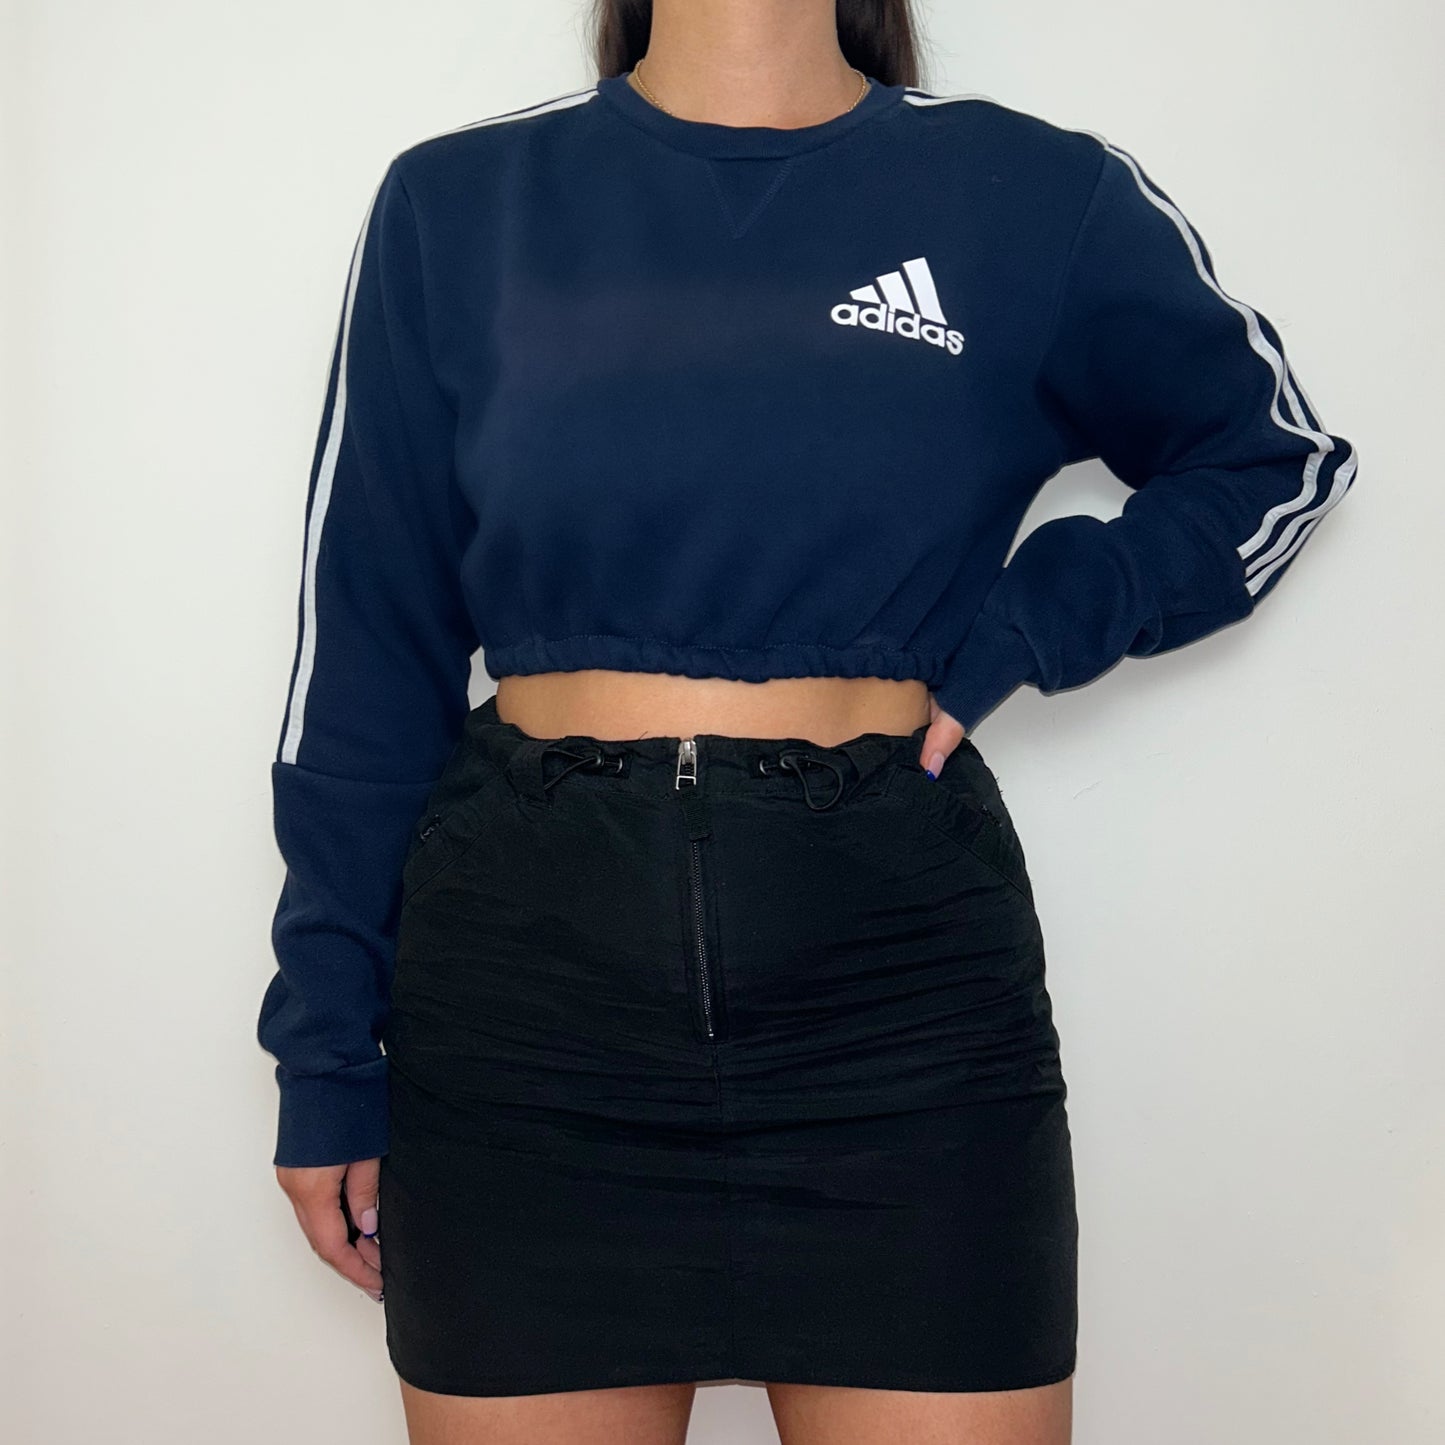 navy cropped sweatshirt with white adidas logo shown on a model wearing a black mini skirt